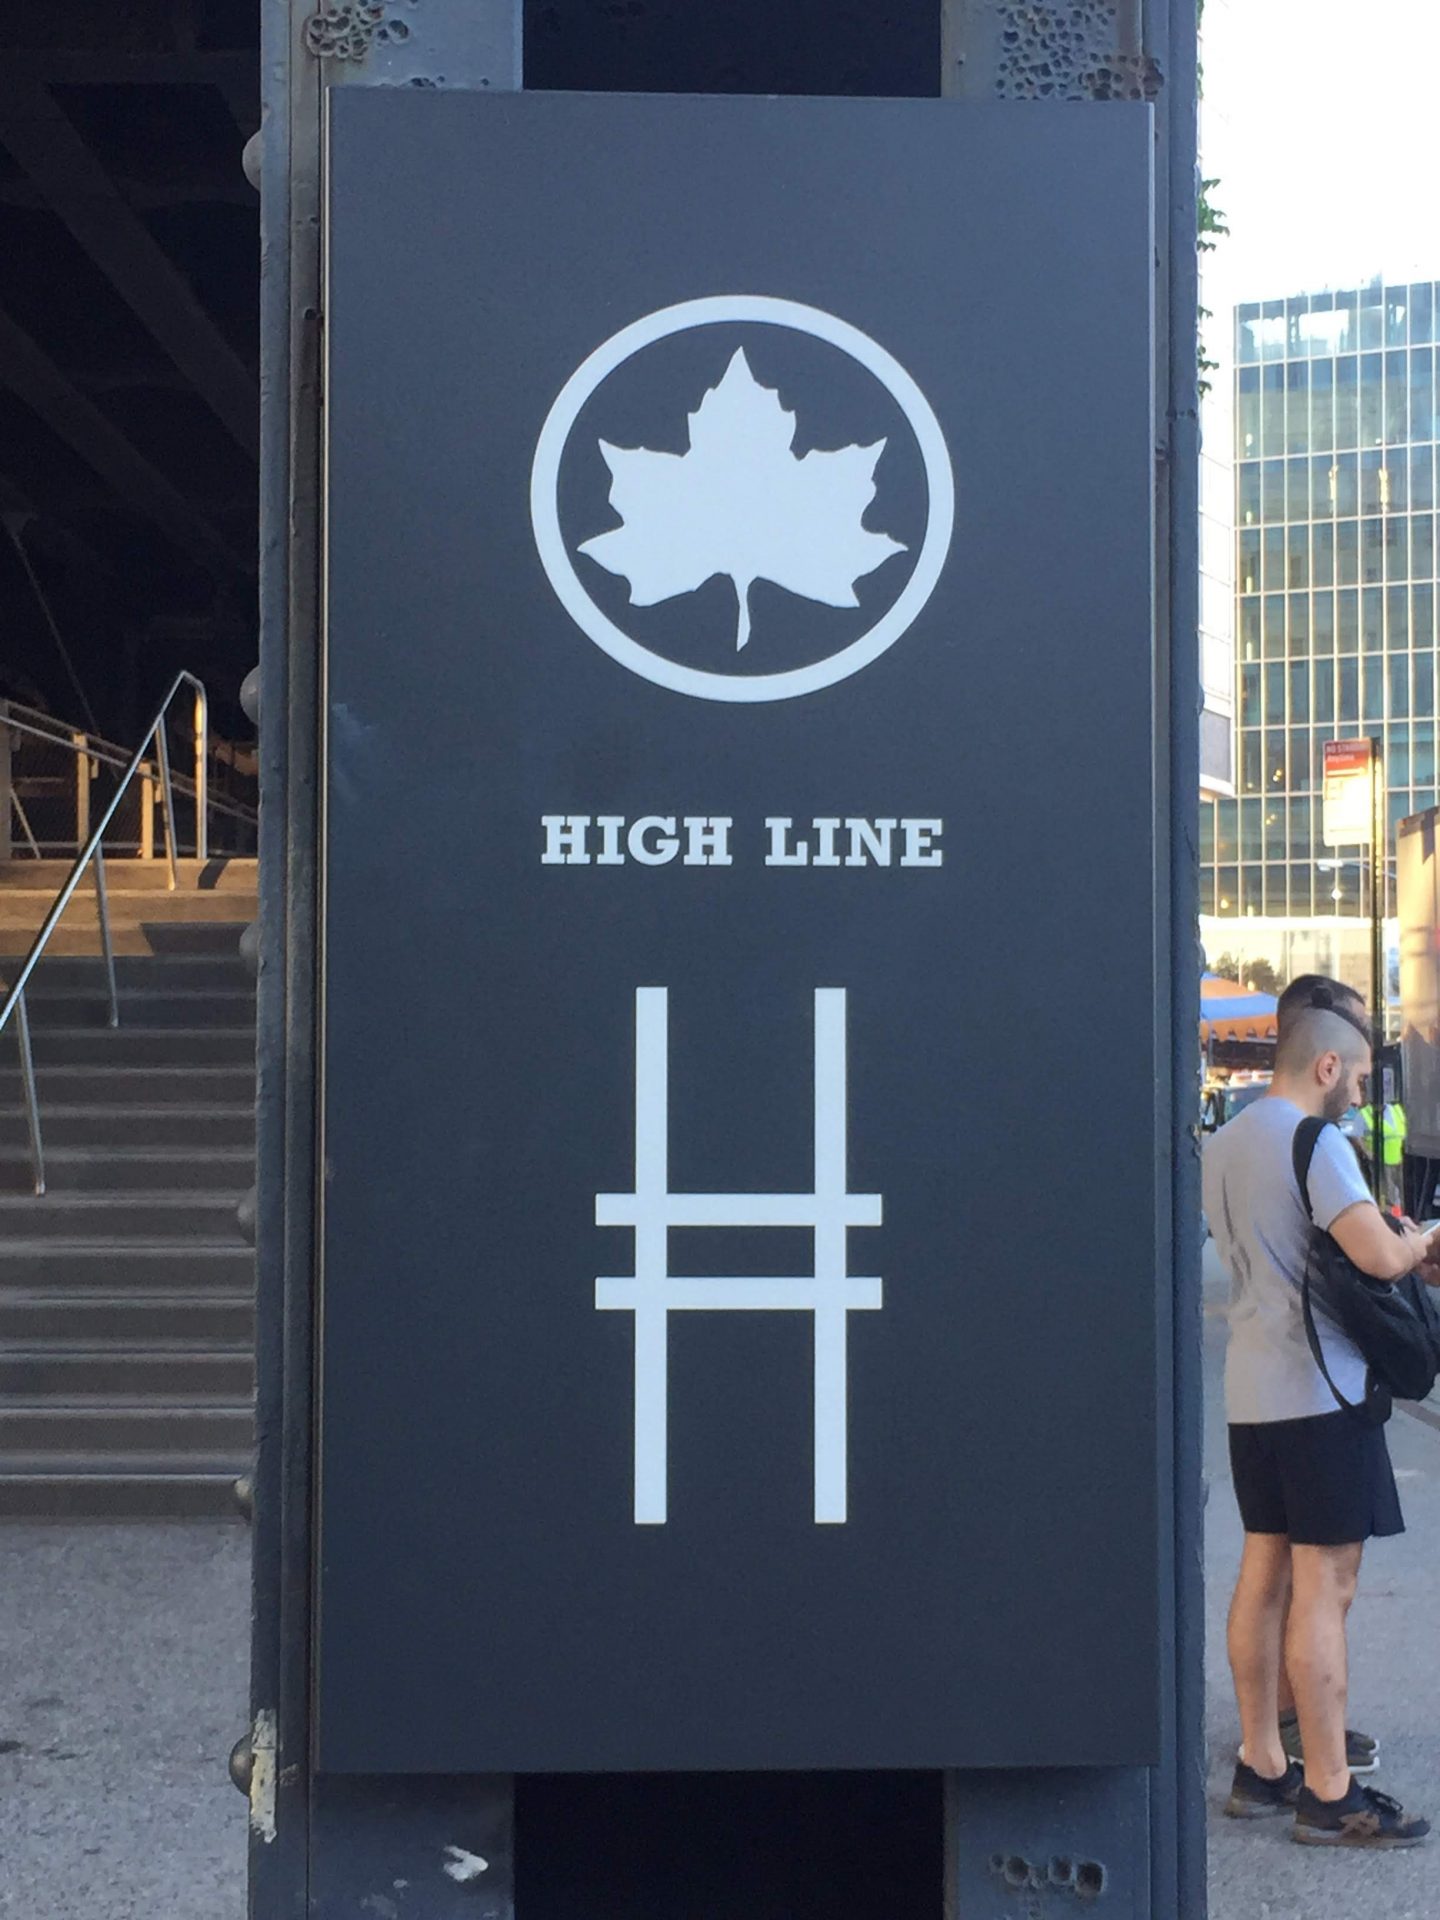 The sign for the High Line, New York